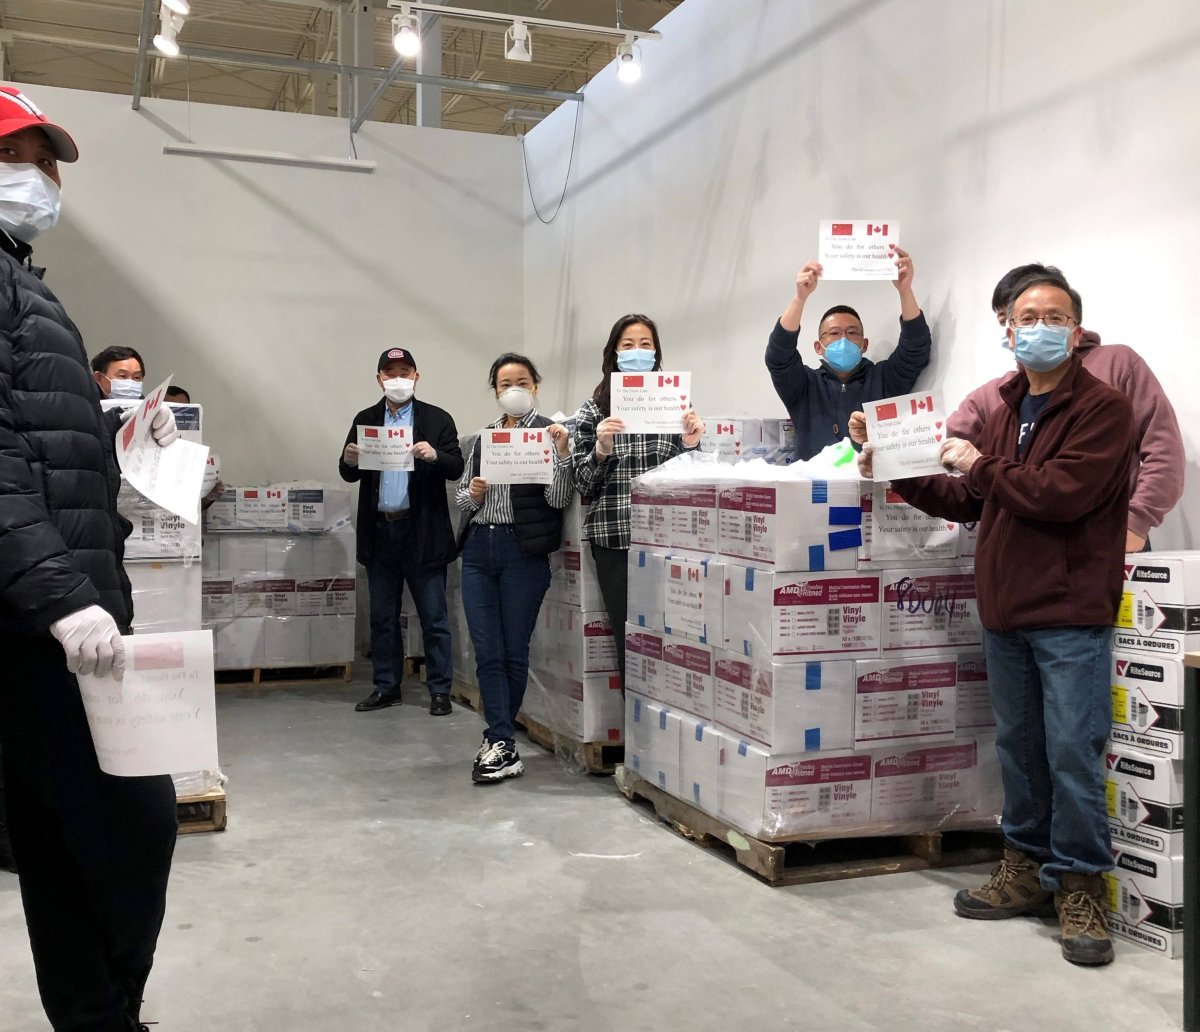 GTEC owners donate 380,000 medical gloves to support workers on the front lines.